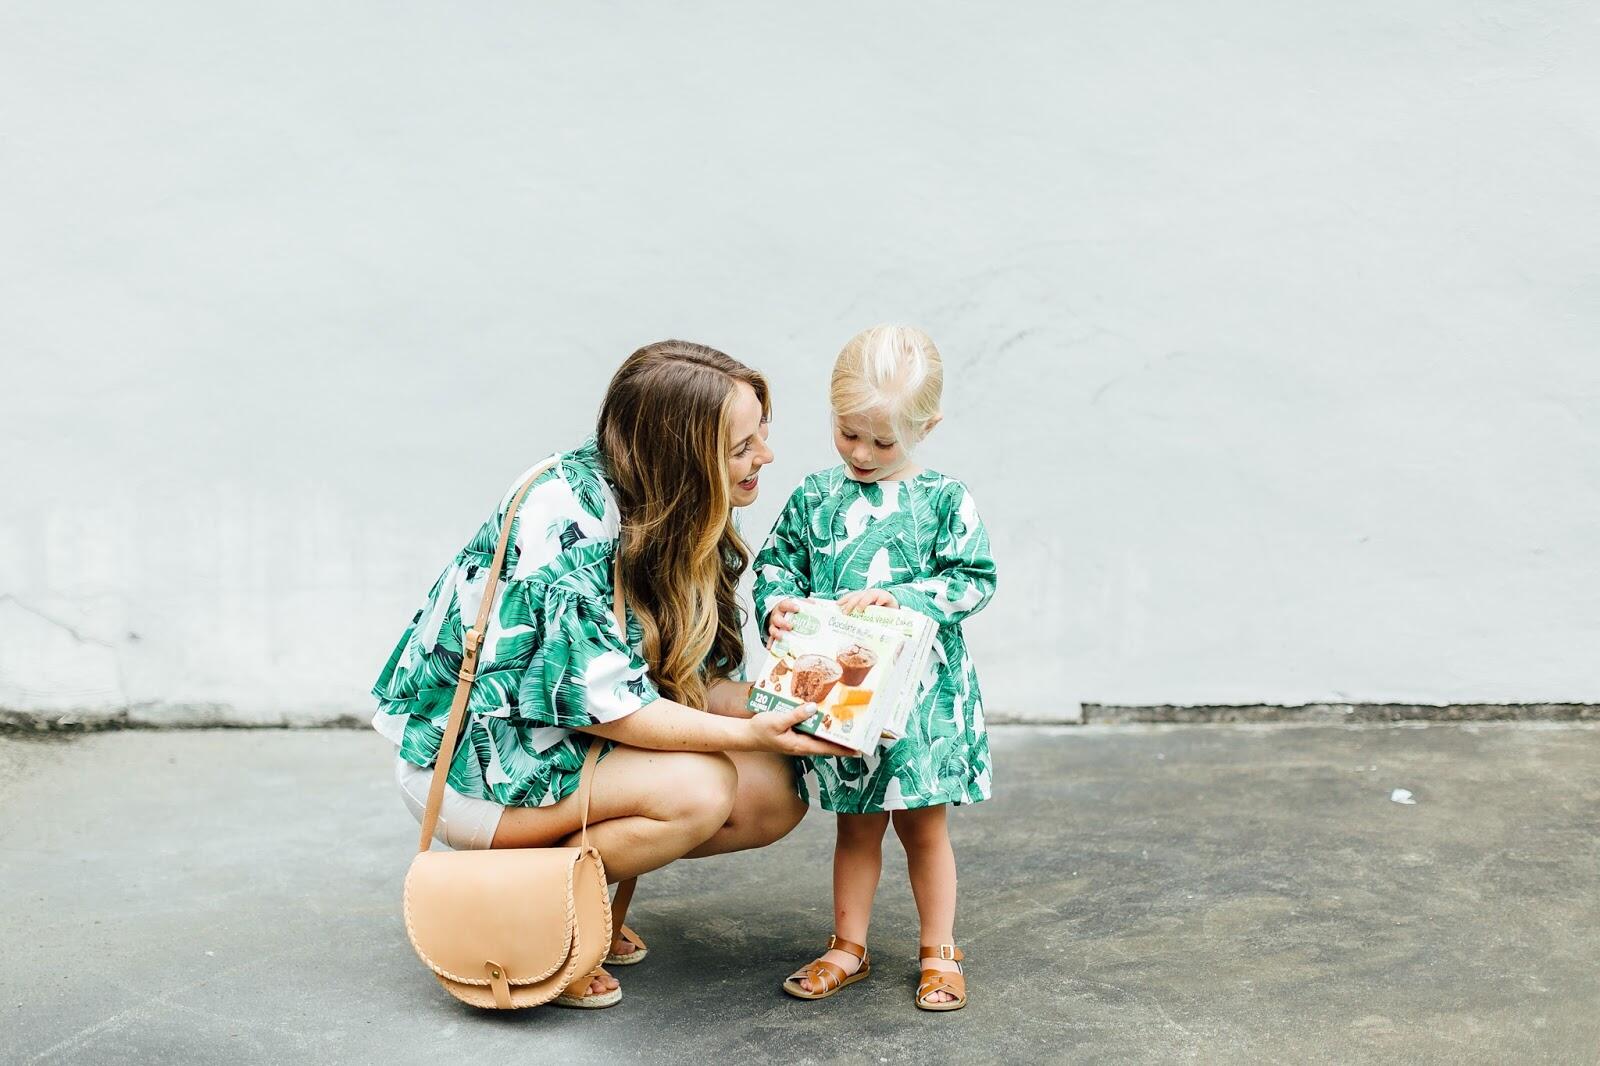 The Perfect On the Go Snacks for Picky Eaters - 5 Tips to Help Your Toddler Eat More Veggies by popular blogger Walking in Memphis in High Heels